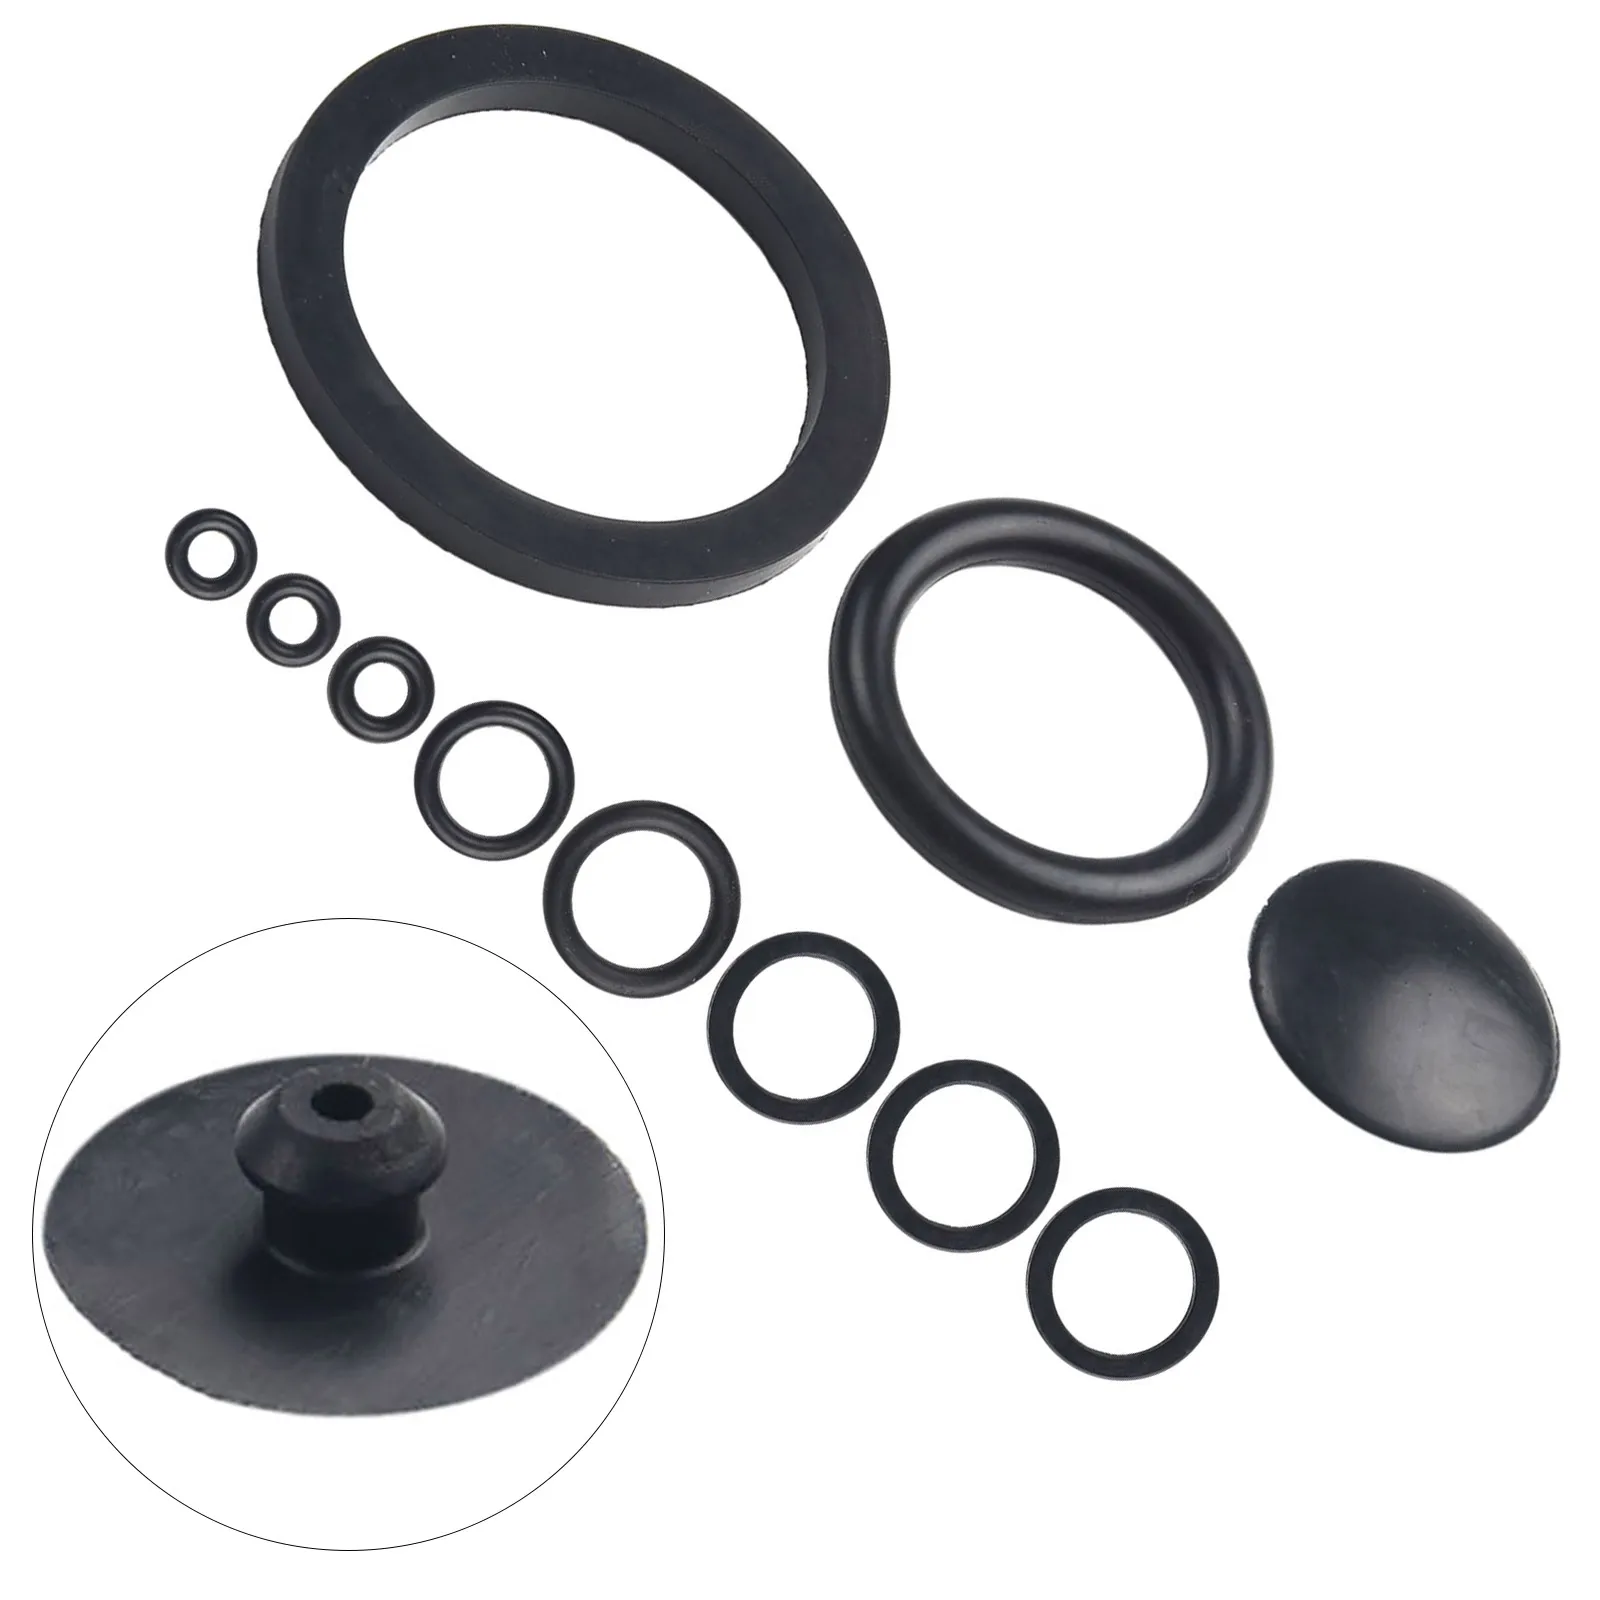 

Keep Your Sprayer In Top Condition With These 10 Durable Rubber Sealing Rings For 3/5/8L Sprayers Essential Garden Accessories